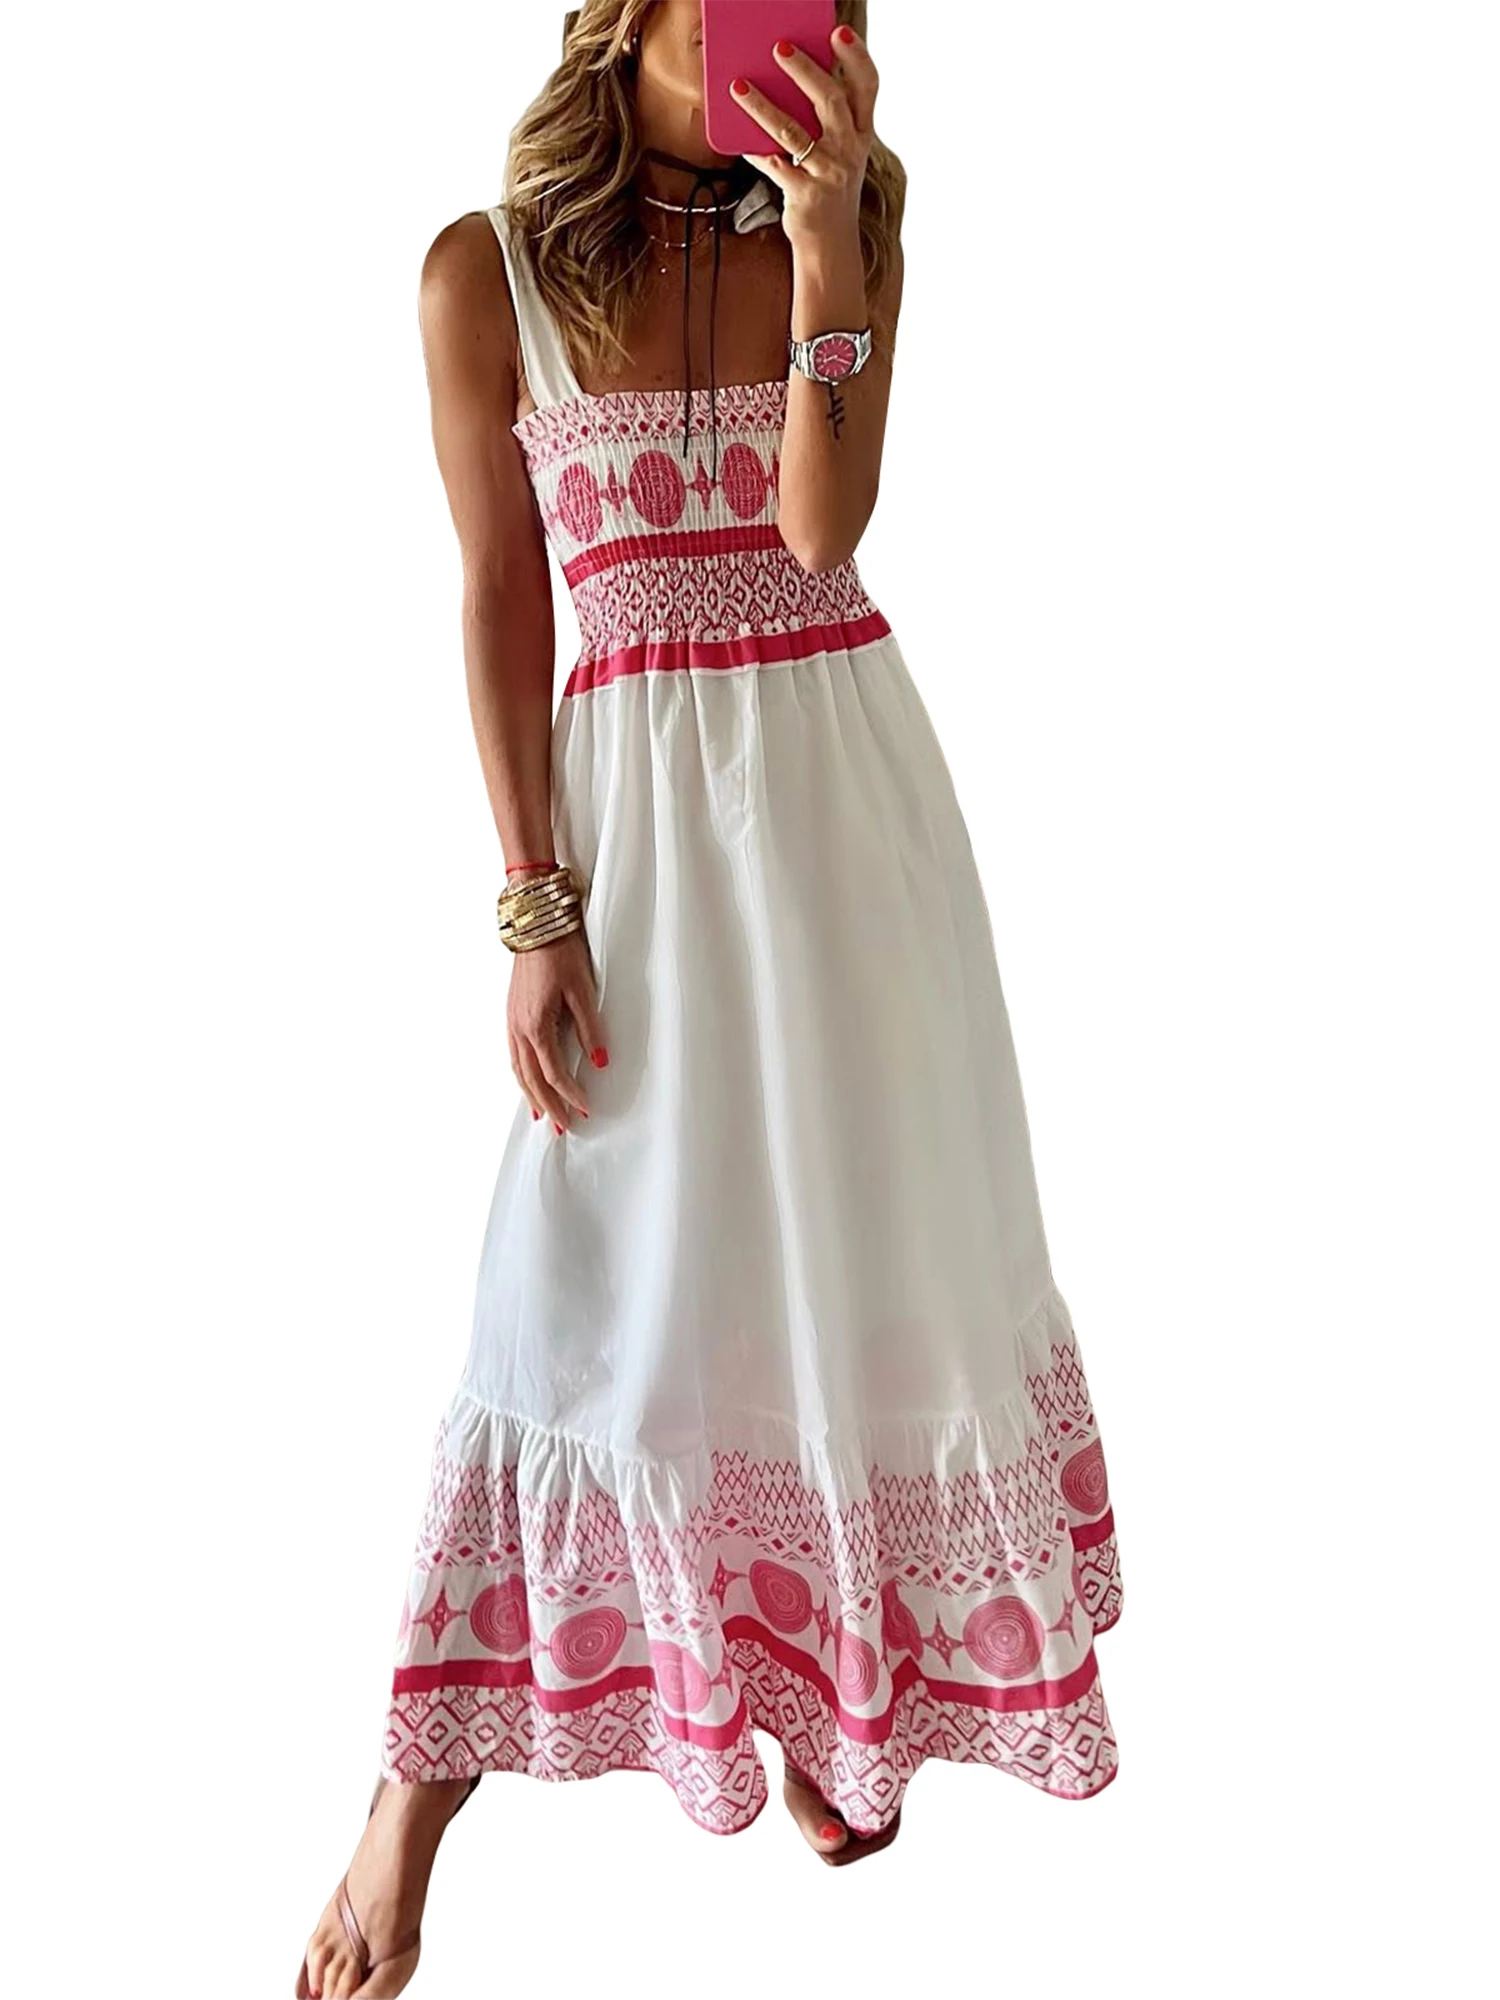 

Stylish and Comfortable Boho for Women - Spaghetti Strap Backless Flowy Sundress with Tie Straps - Perfect for